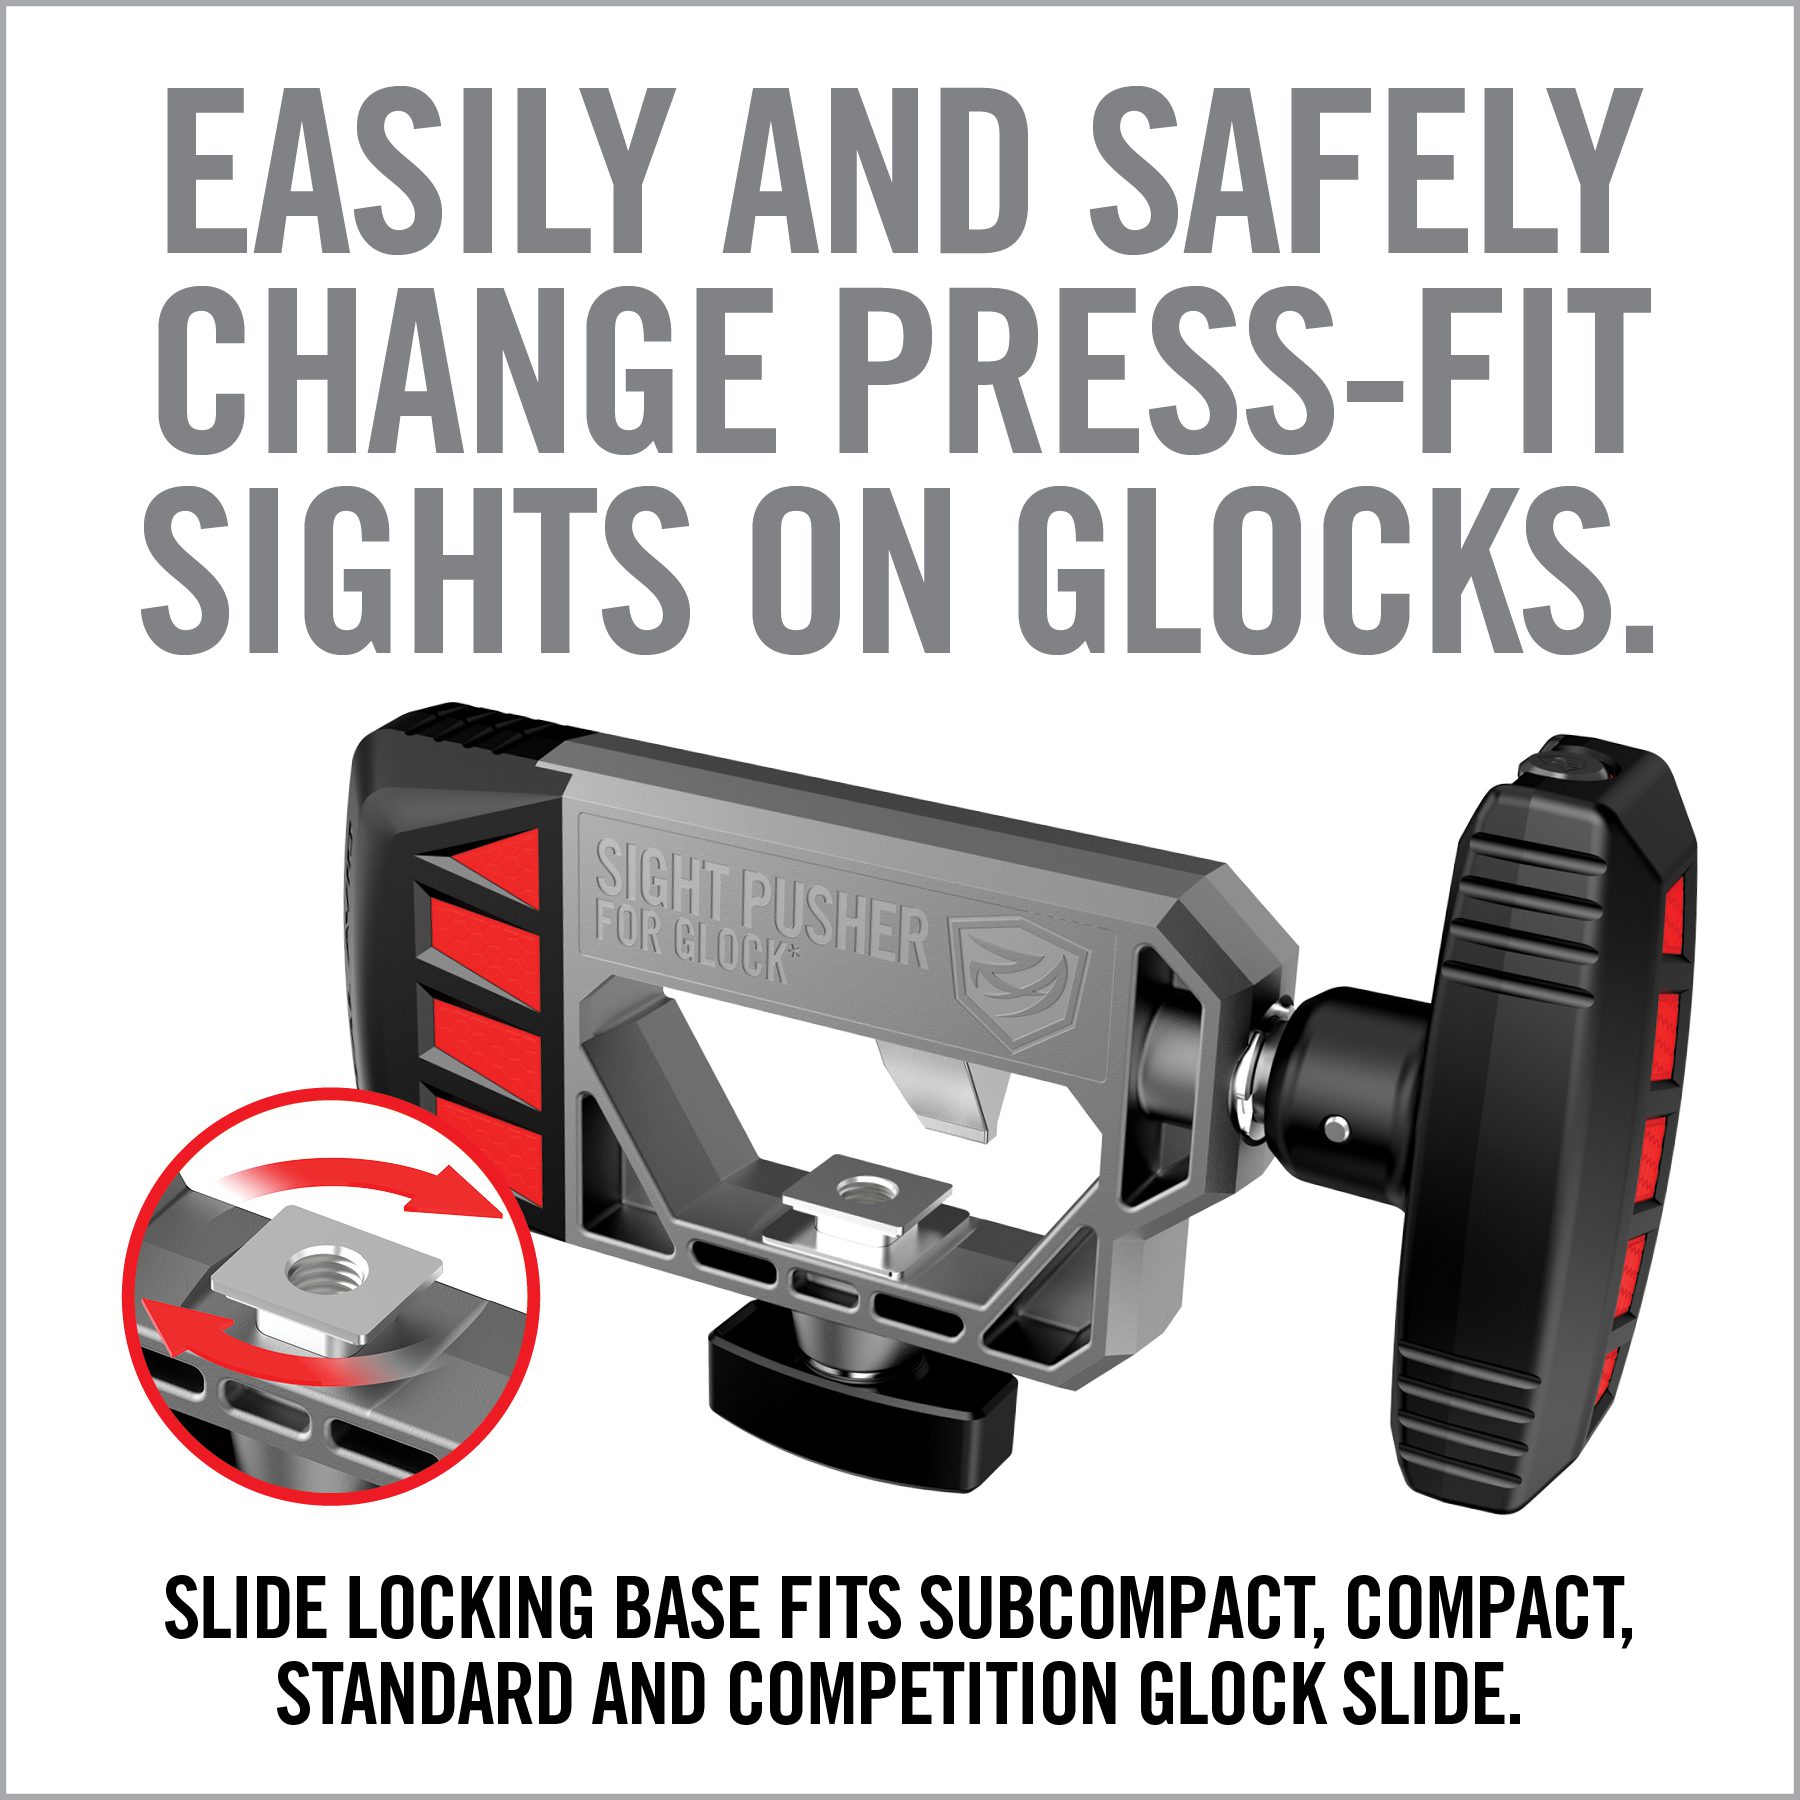 a poster with instructions to adjust and change press - fit sights on glocks